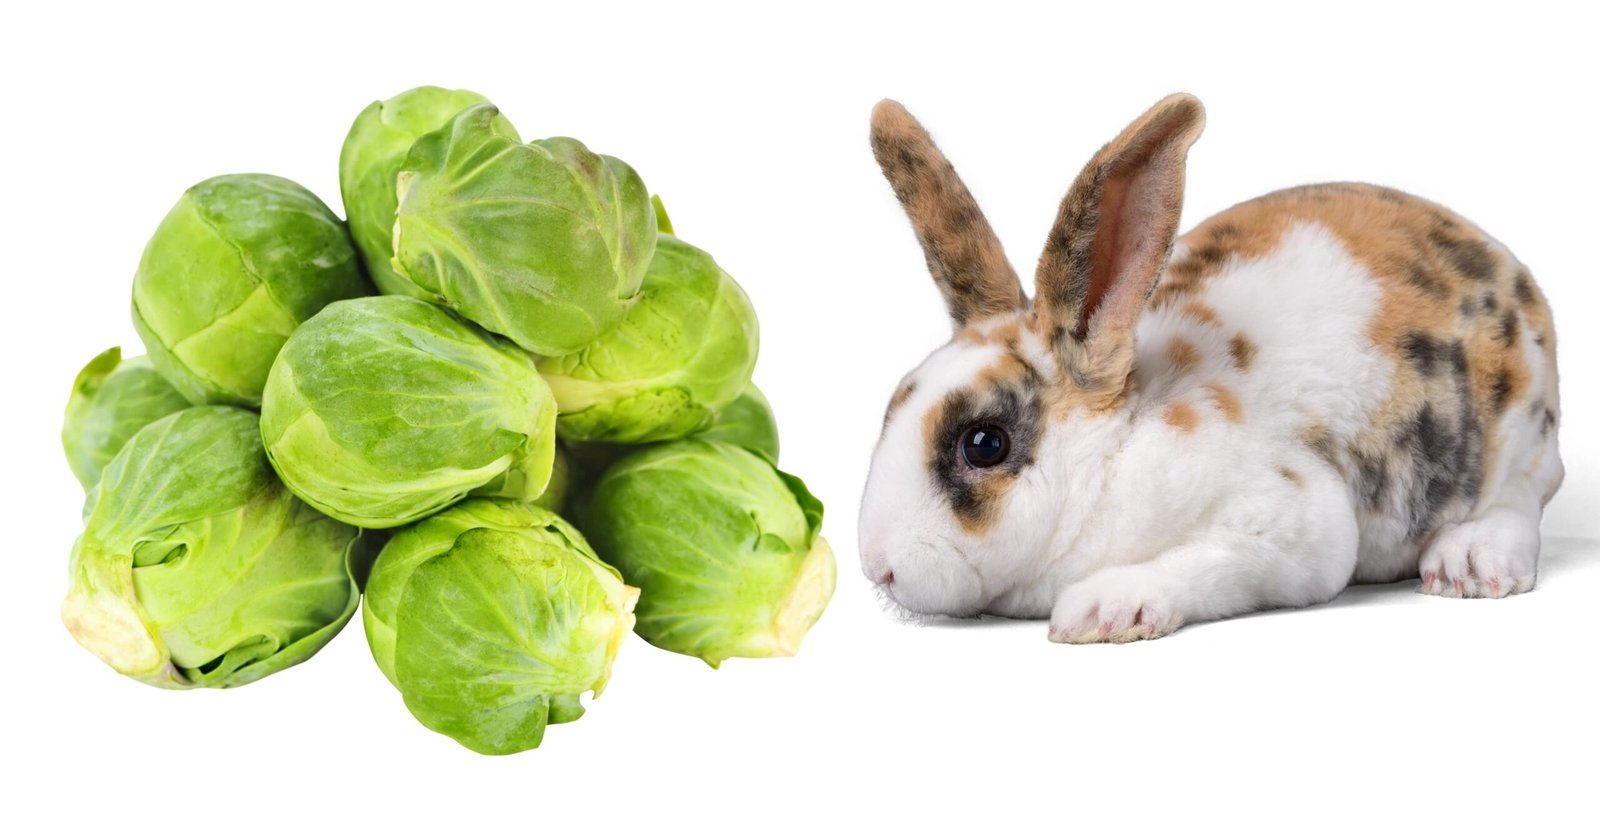 Can Bunnies Eat Brussel Sprouts